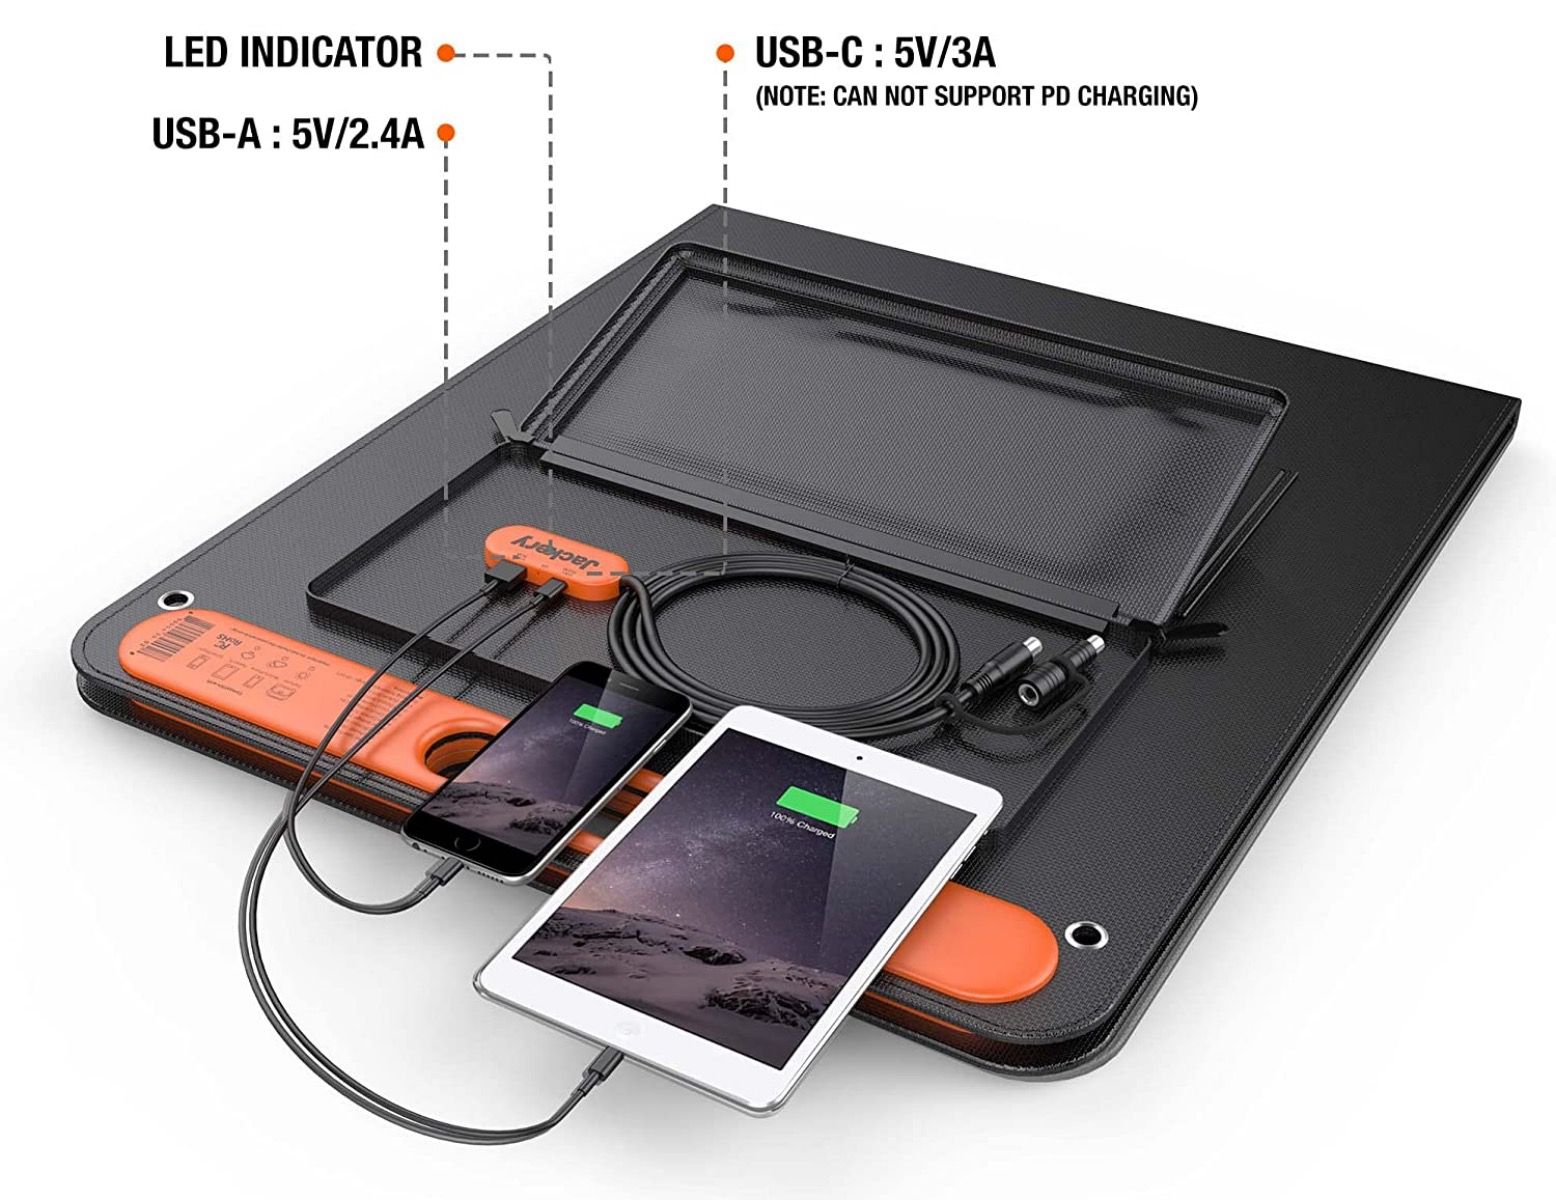 Jackery SolarSaga 100W lying flat and charging cellphone and tablet via USB ports